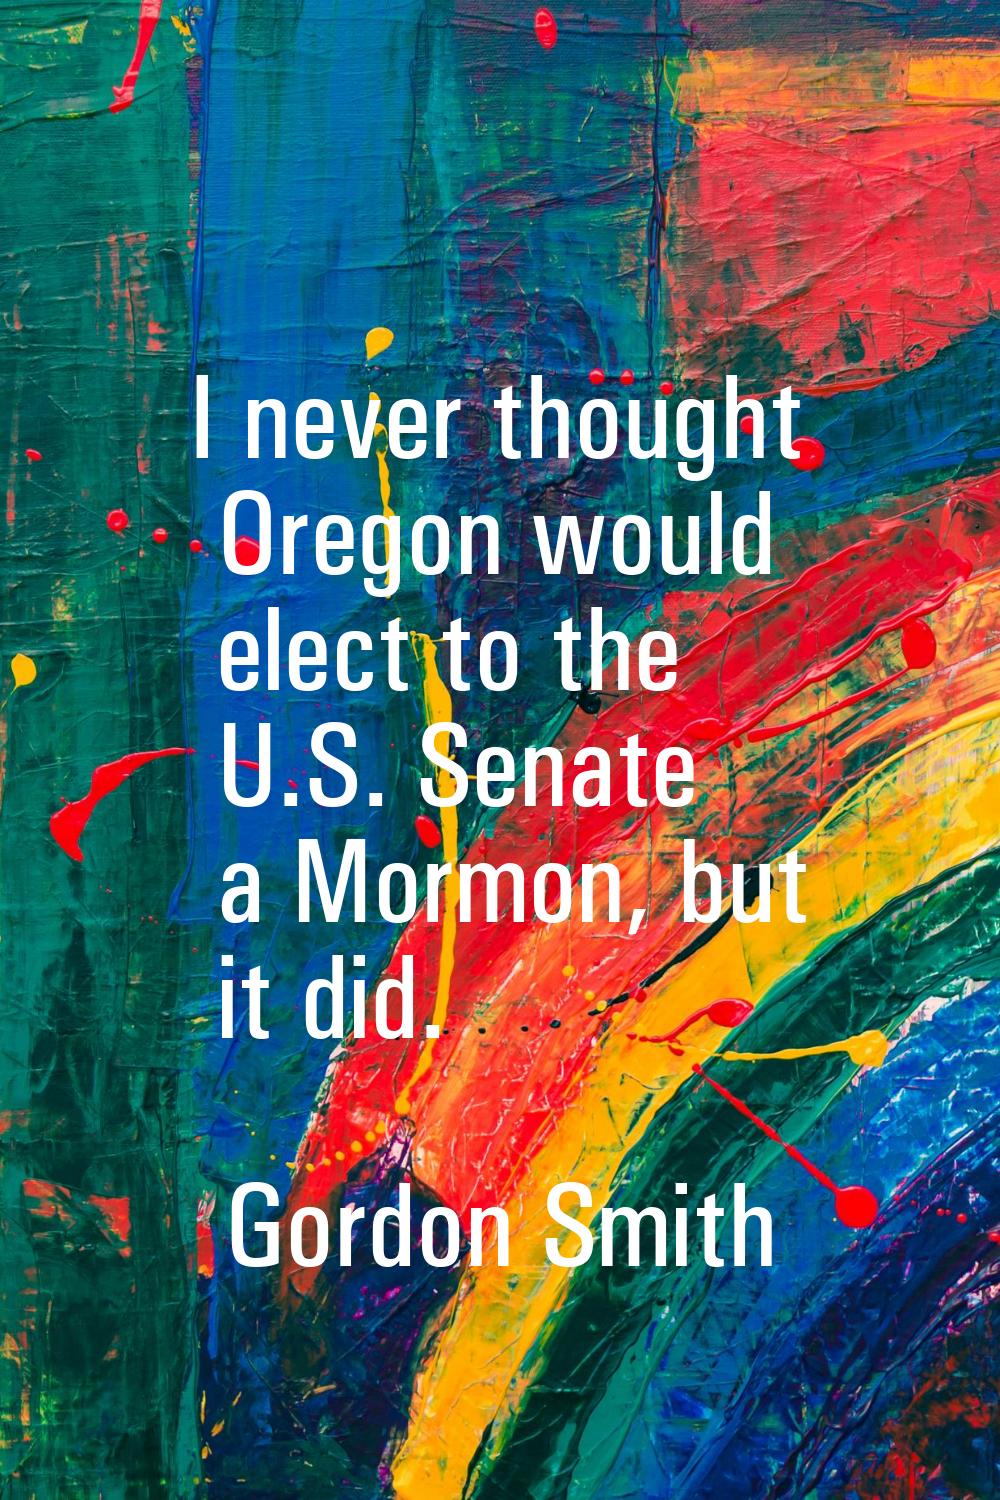 I never thought Oregon would elect to the U.S. Senate a Mormon, but it did.